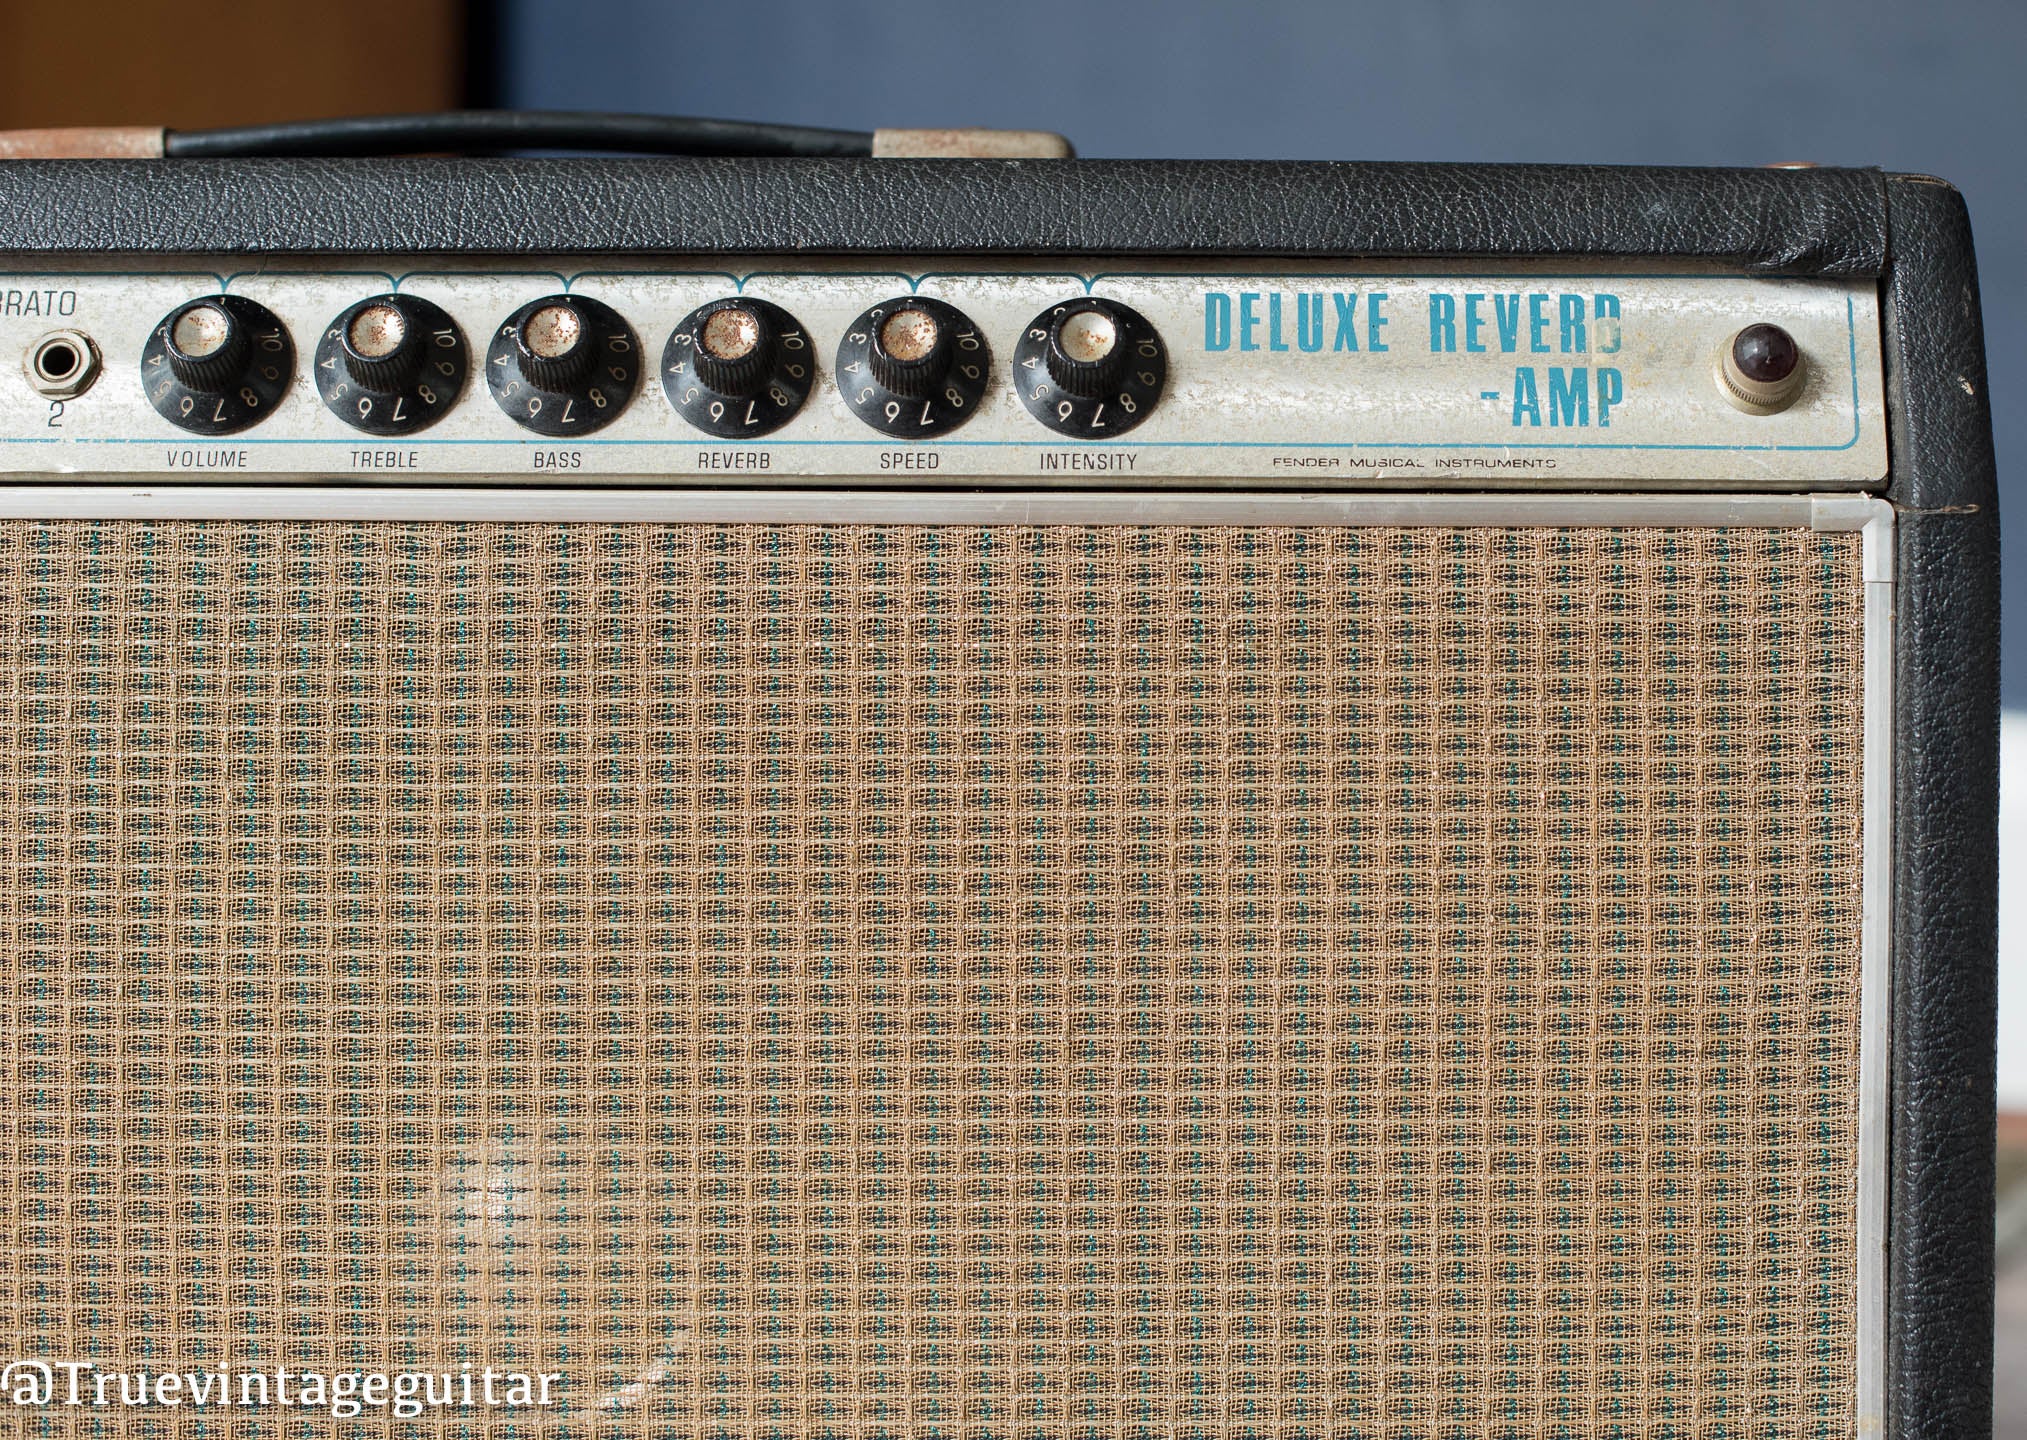 1969 Fender Deluxe Reverb Amp, silver face plate